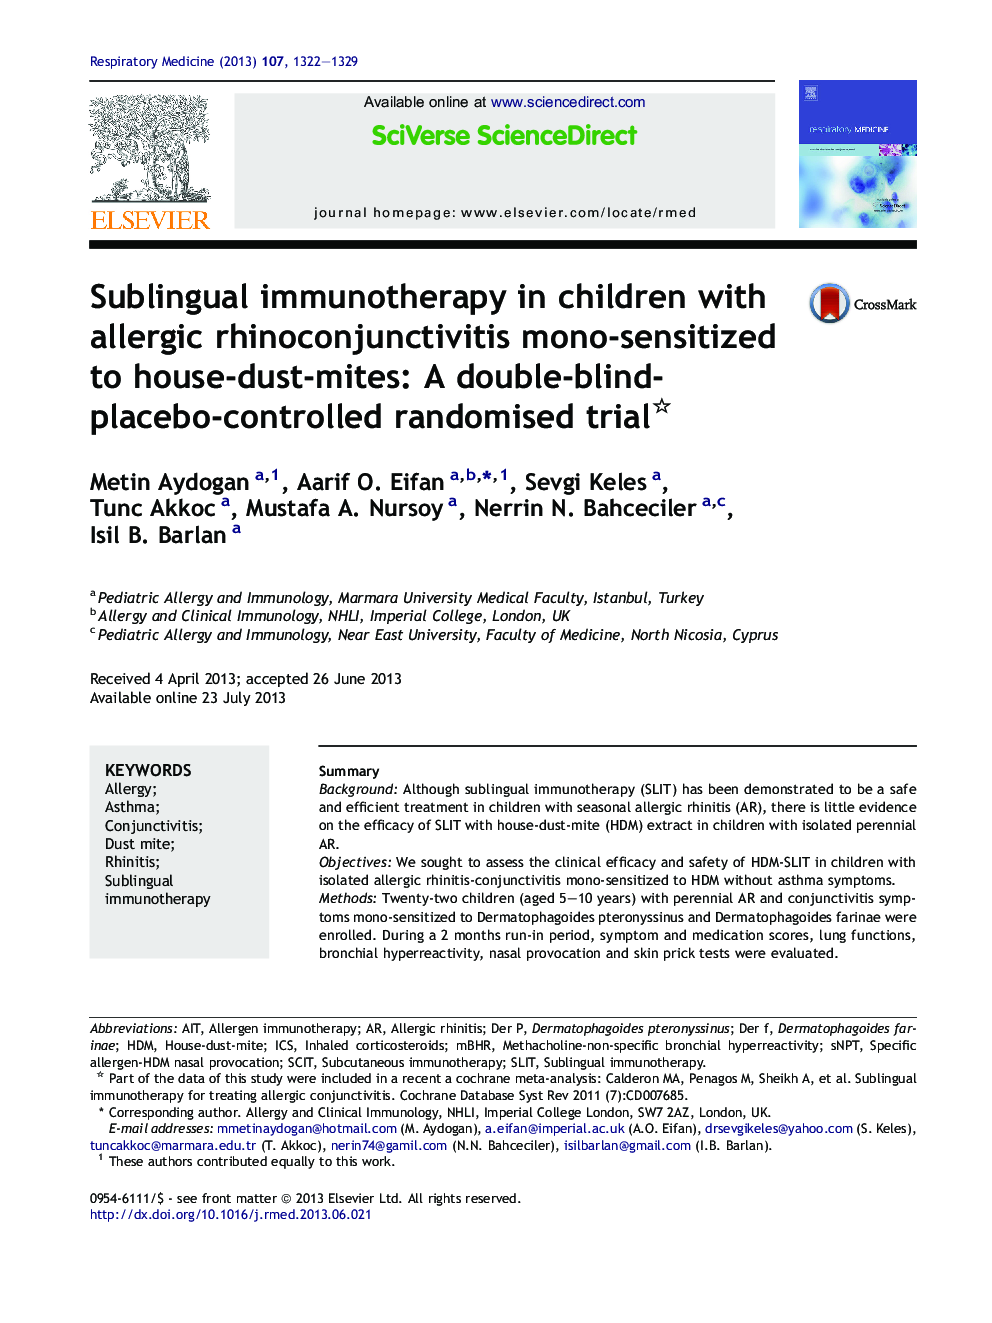 Sublingual immunotherapy in children with allergic rhinoconjunctivitis mono-sensitized to house-dust-mites: A double-blind-placebo-controlled randomised trial